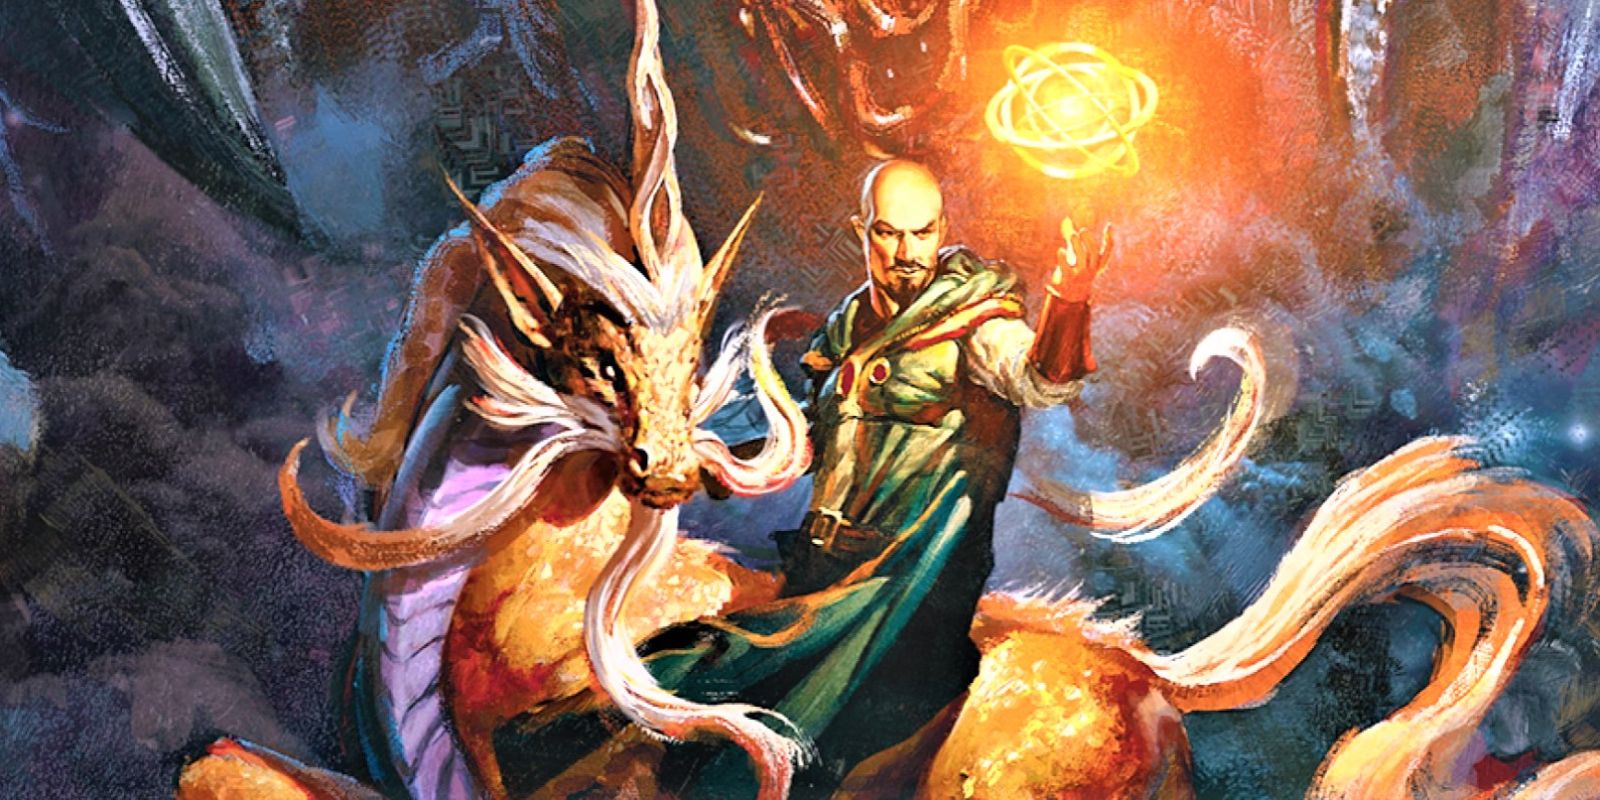 Cover art for D&D's Monsters of the Multiverse sourcebook, showing a sinister looking spellcaster levitating glowing, magical rings next to his unicorn-like mount.